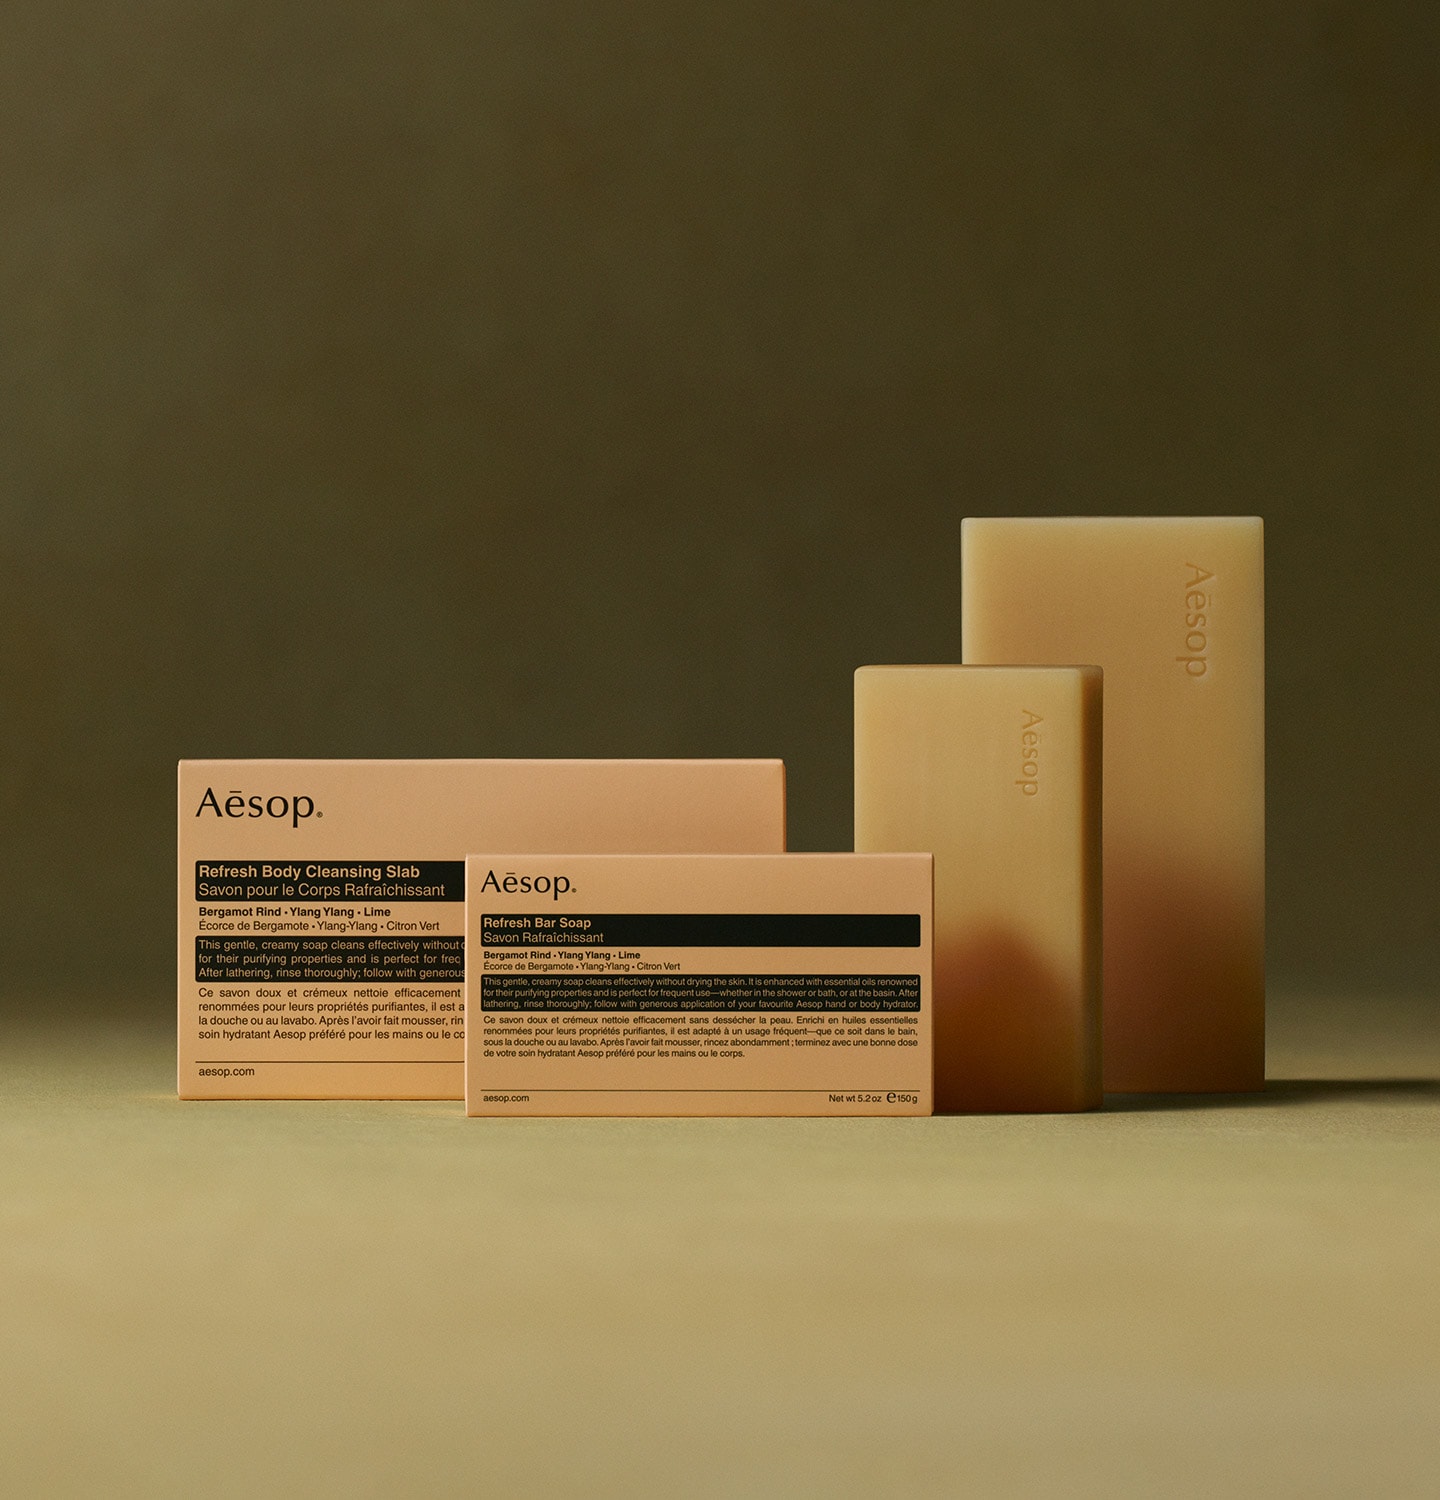 Refresh Body Cleansing Slab blocks and carton packaging placed in front of green textured background